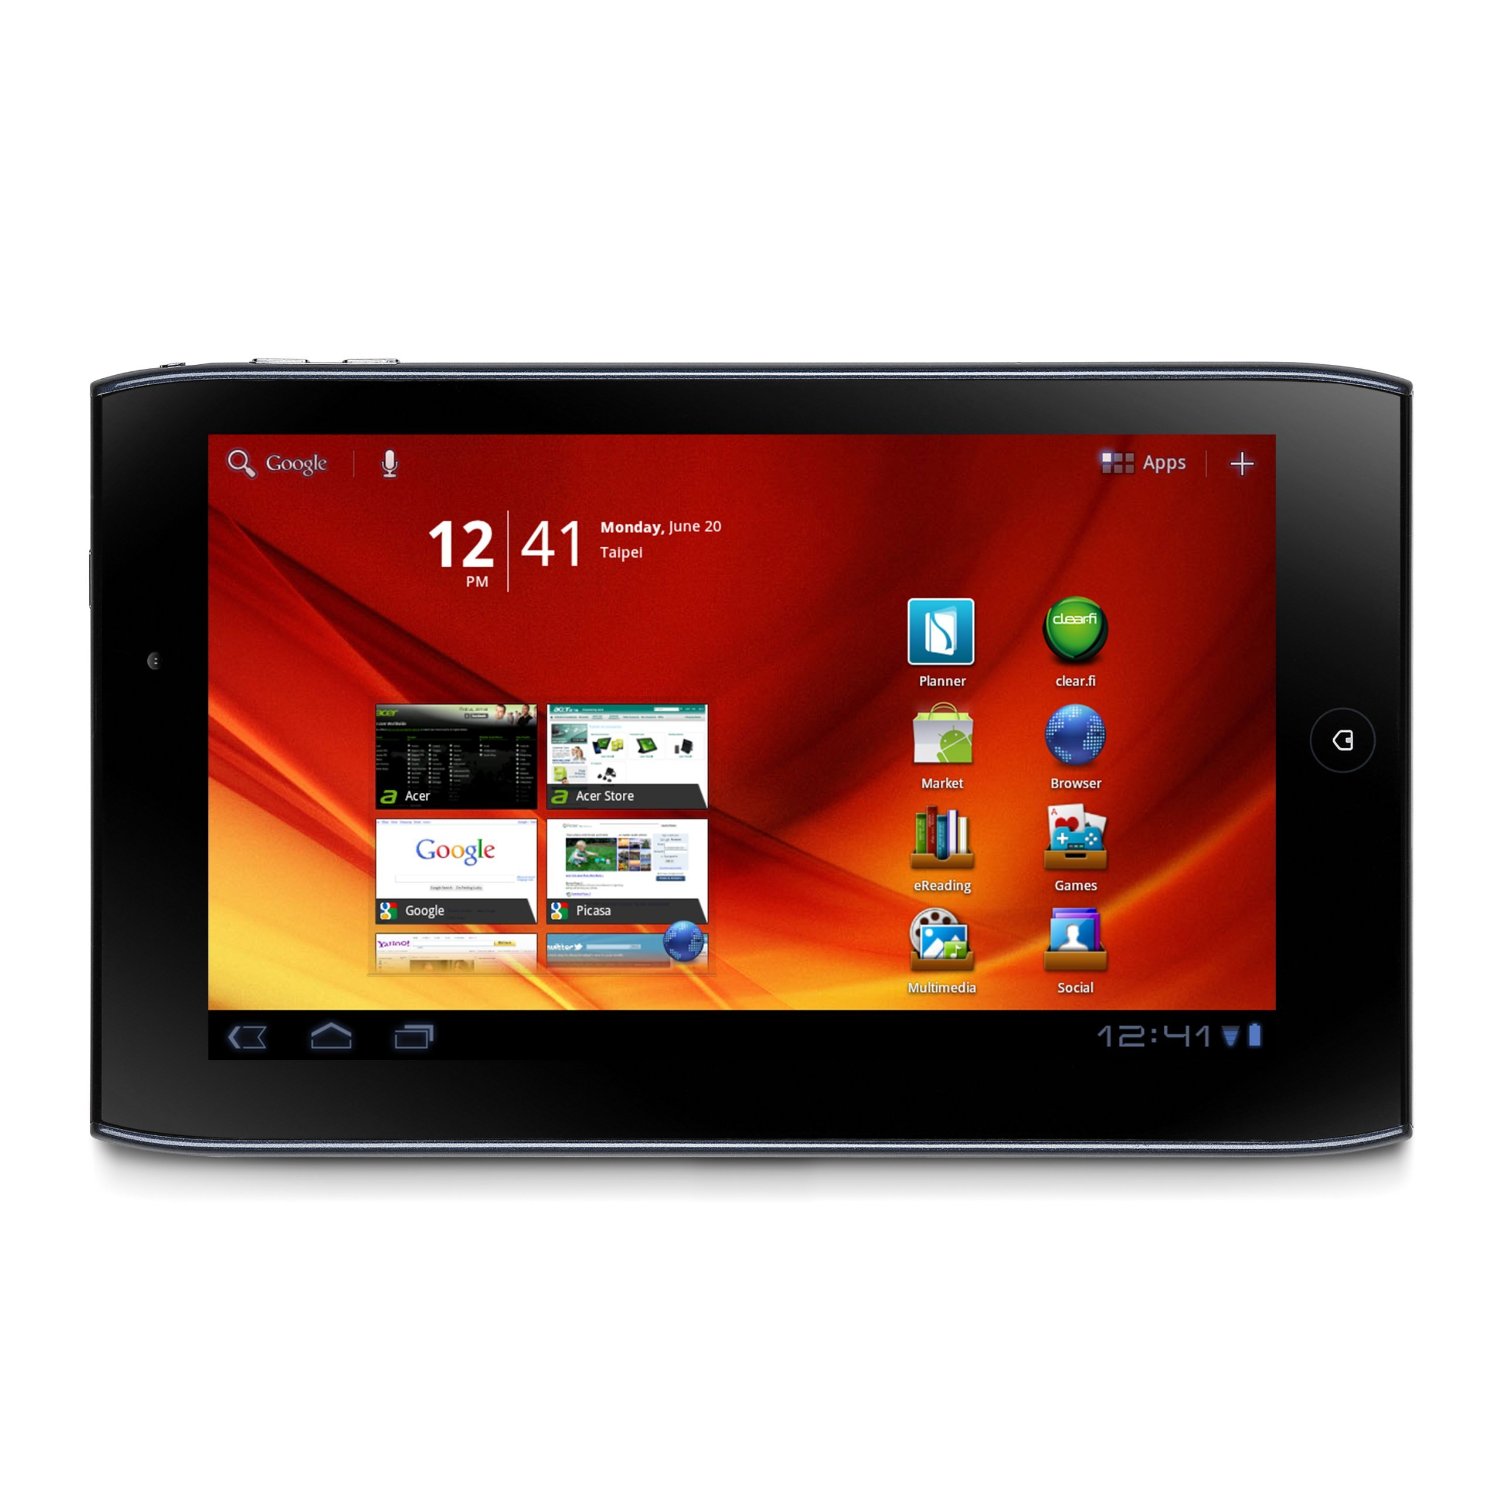 http://thetechjournal.com/wp-content/uploads/images/1108/1313555801-acer-iconia-tab-a10007u16u-7inch-tablet-1.jpg